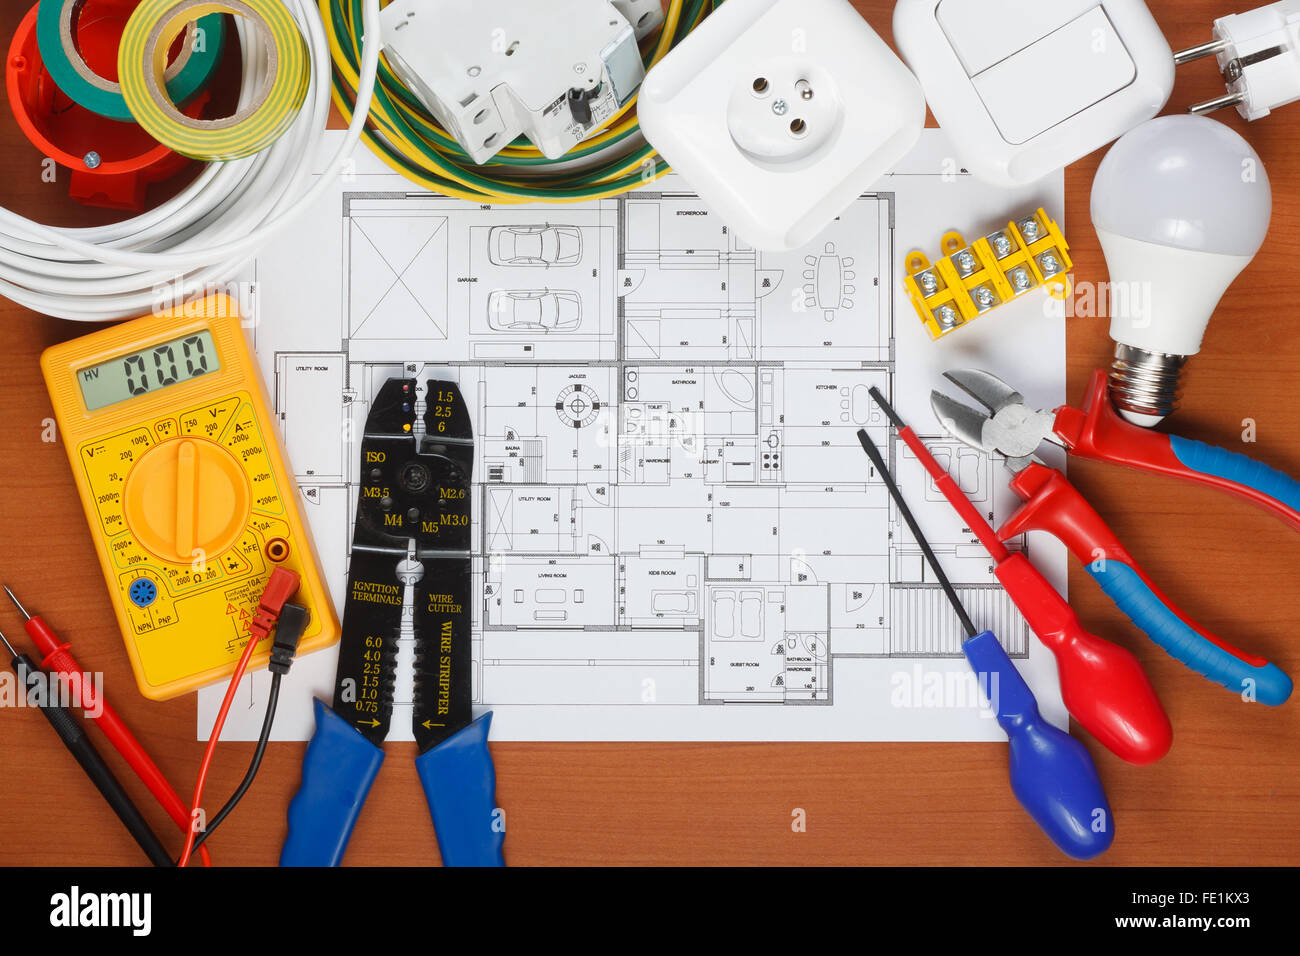 Electrical equipment, tools and house plans on the desk Stock Photo